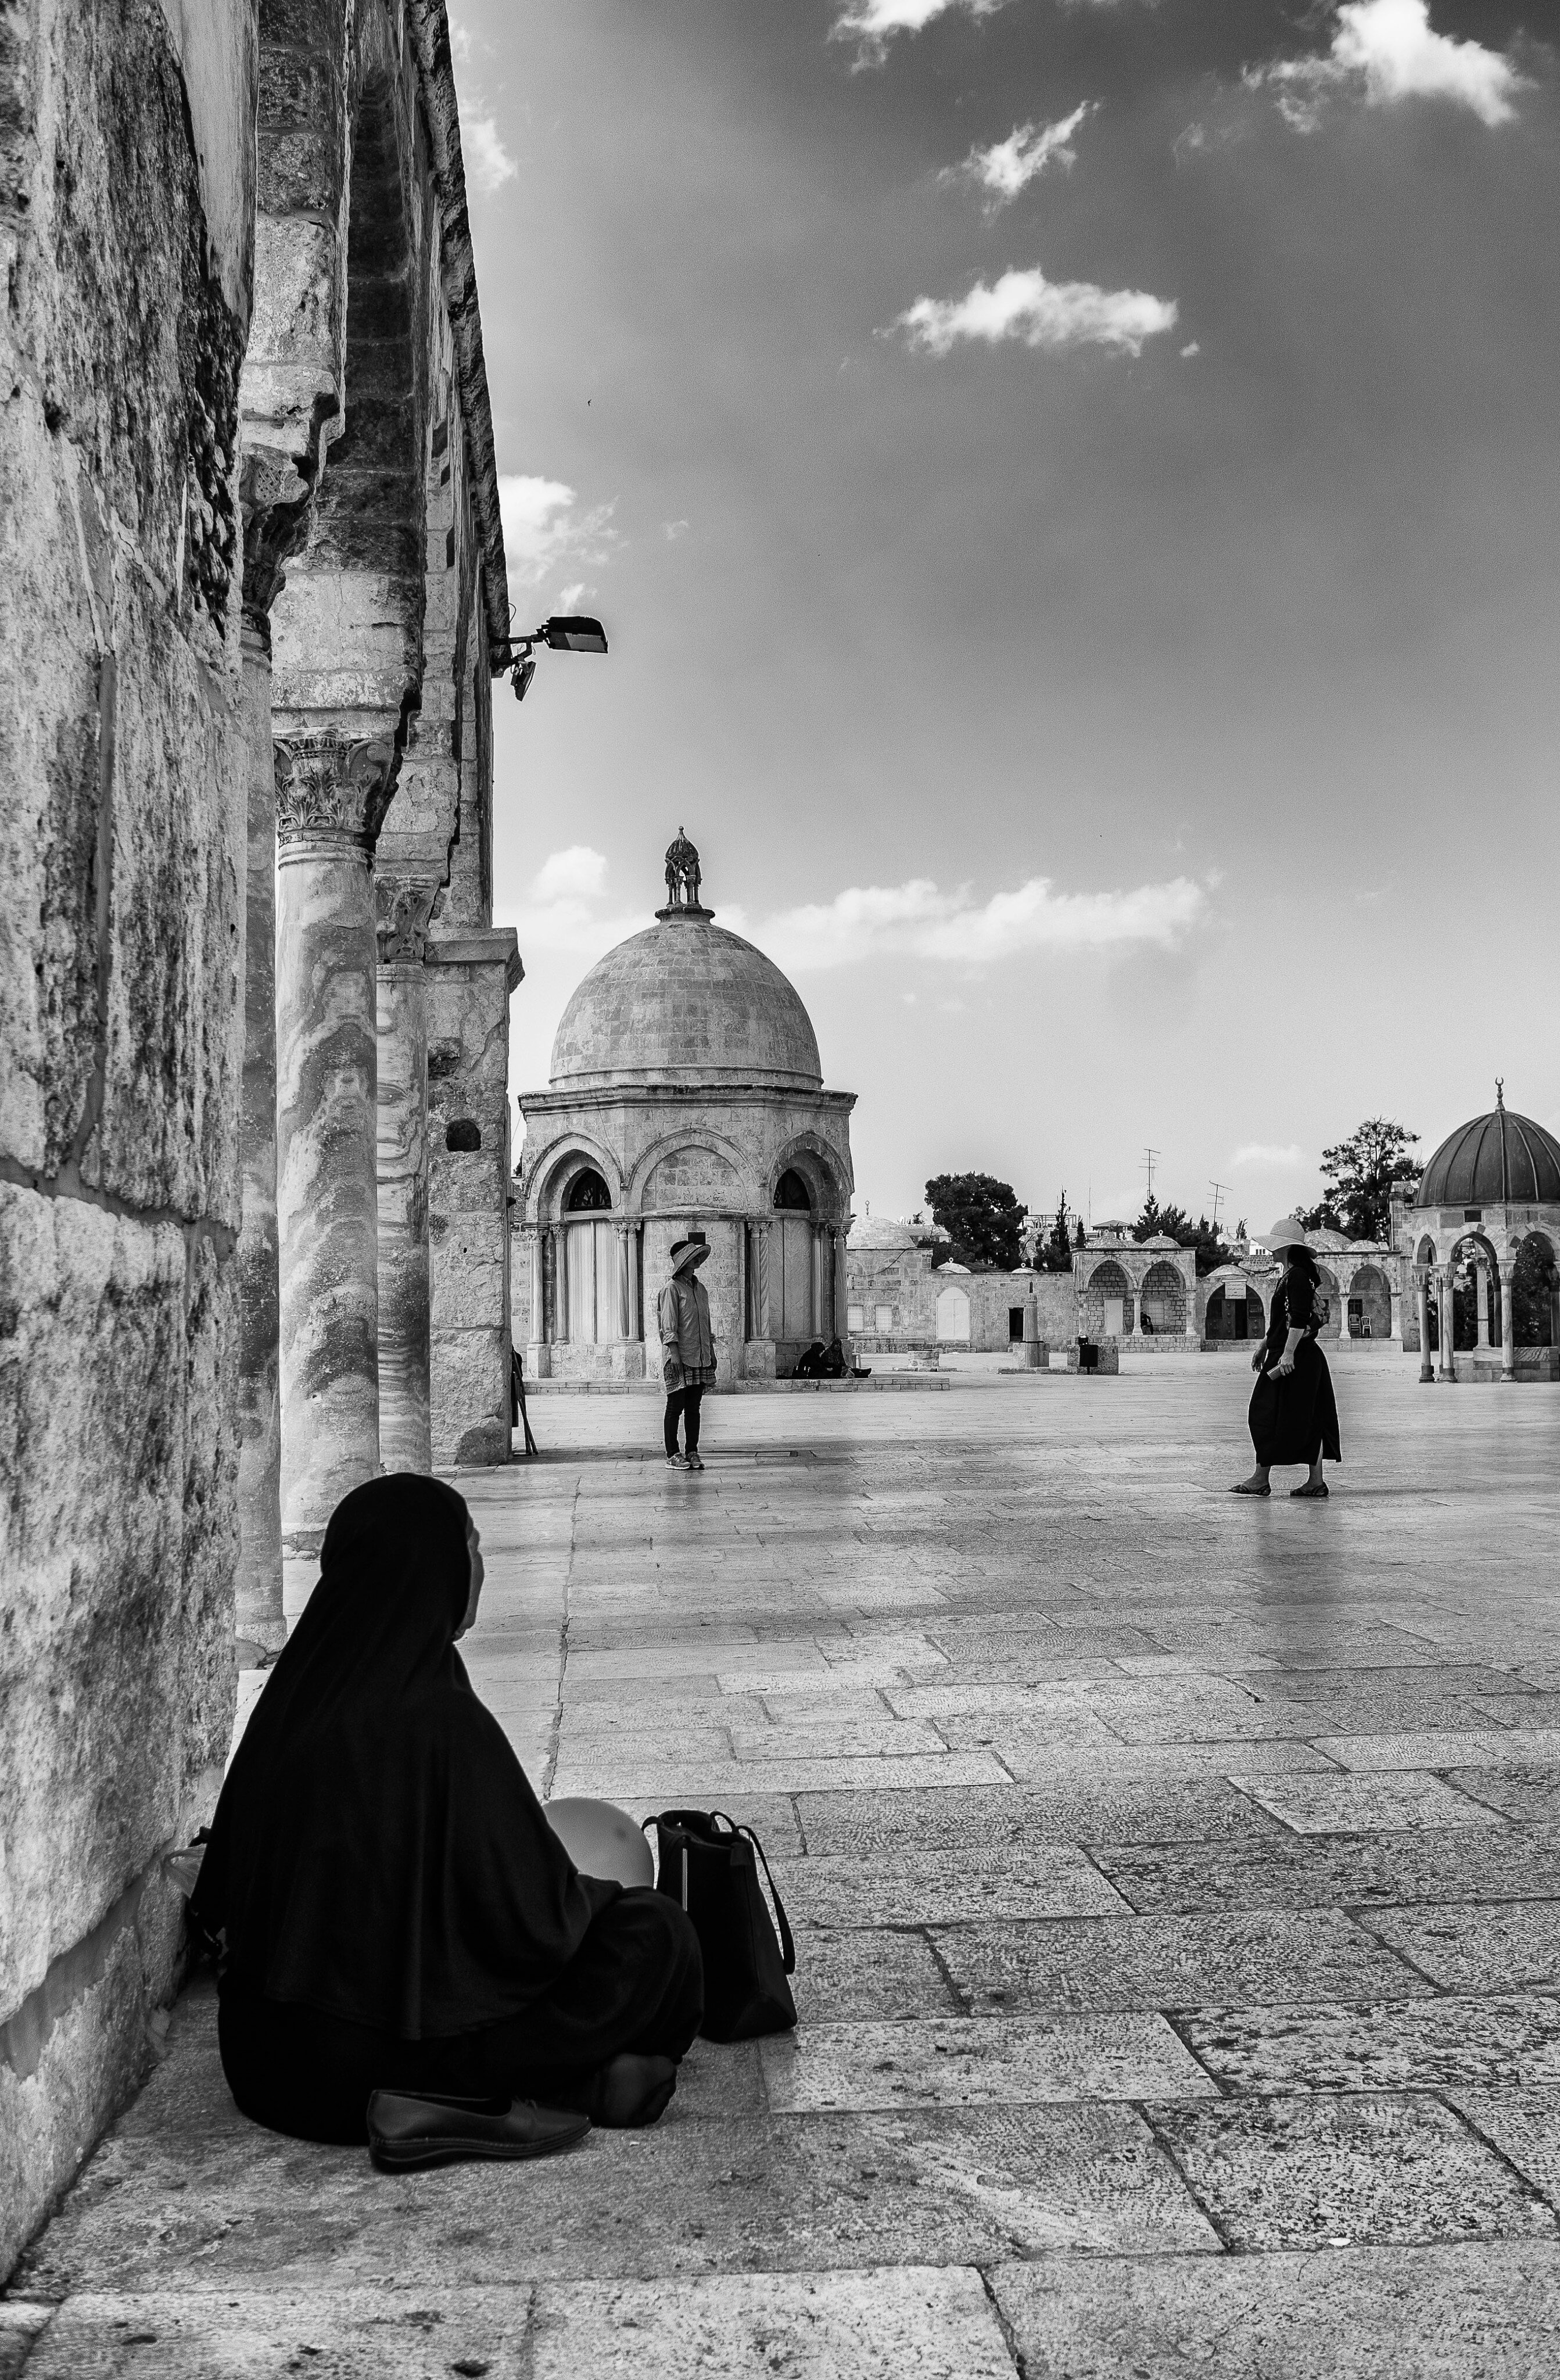 Two worlds collide at Temple Mount